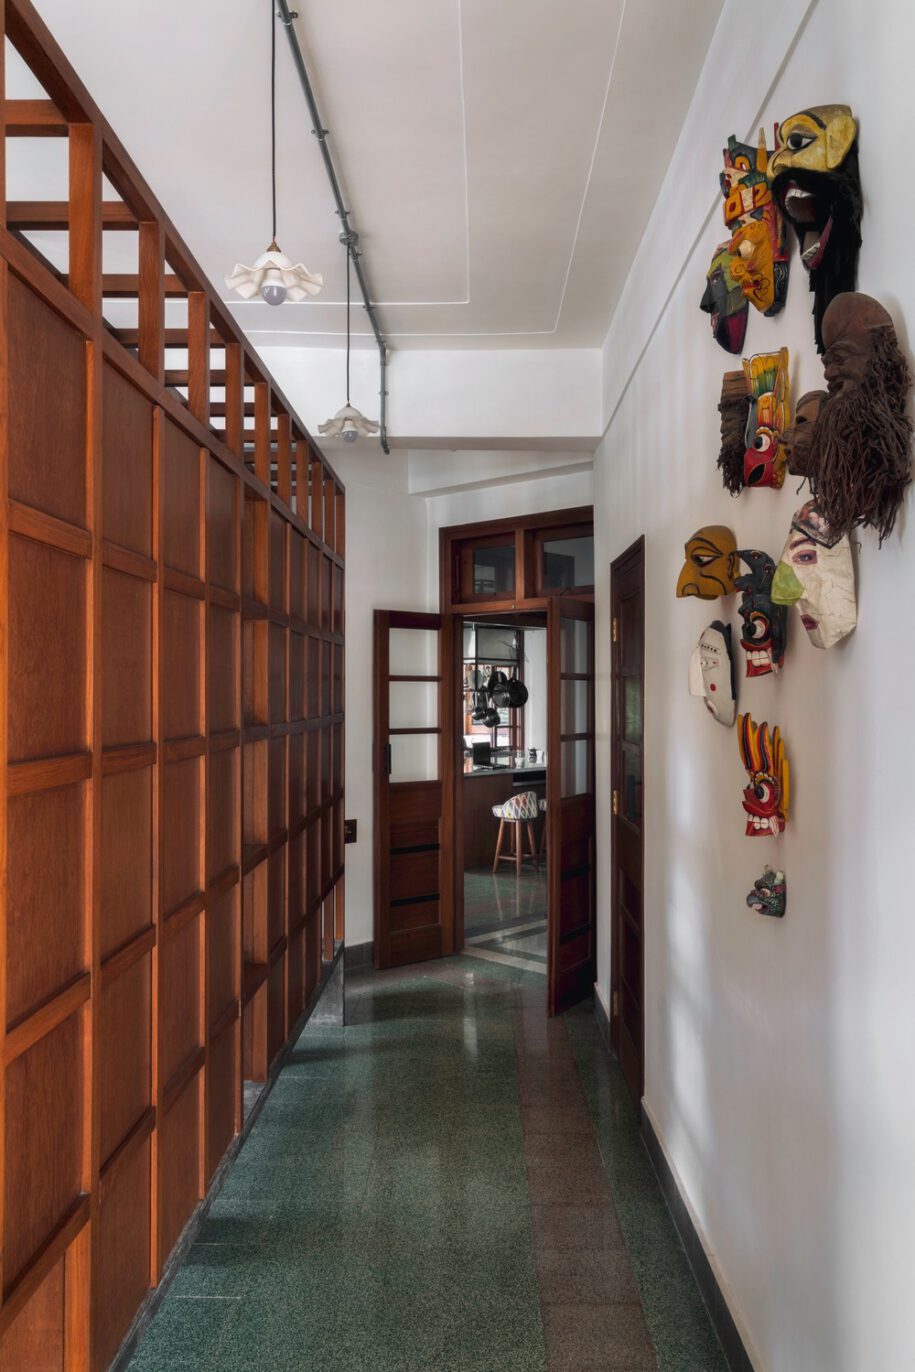 Archisearch Southlands: retrofitting an 80-year-old Art-Deco apartment in Mumbai, India by SquareWorks